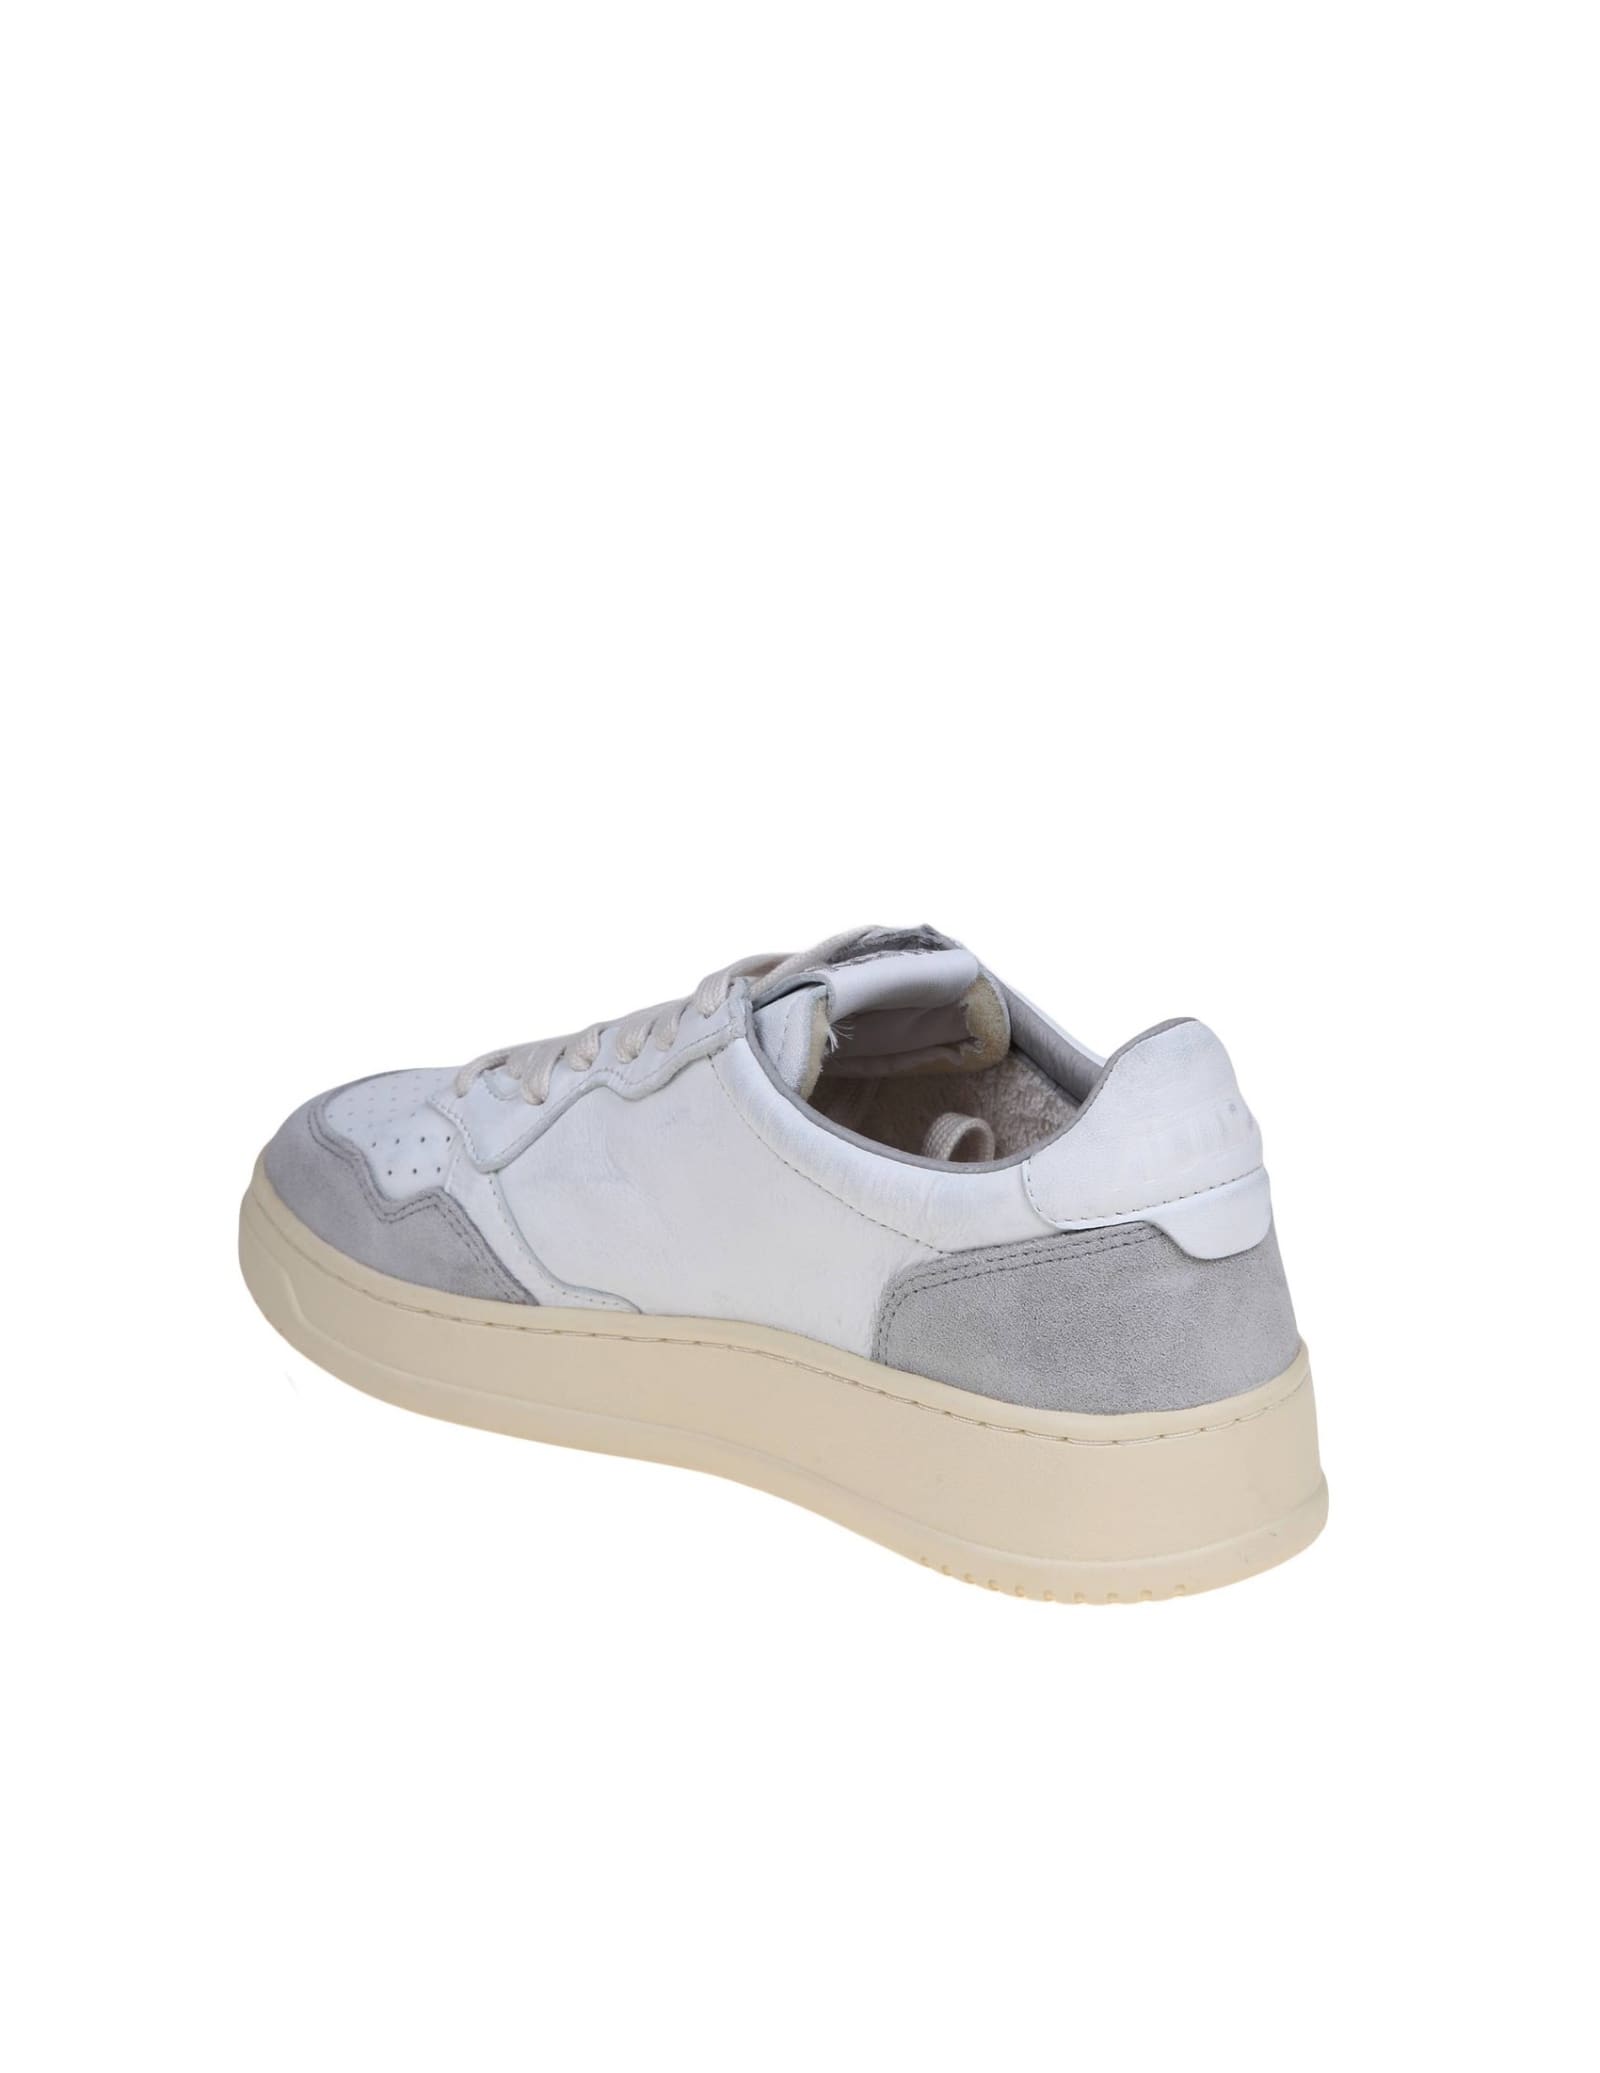 Shop Autry Sneakers In White And Gray Leather And Suede In Wht/grey